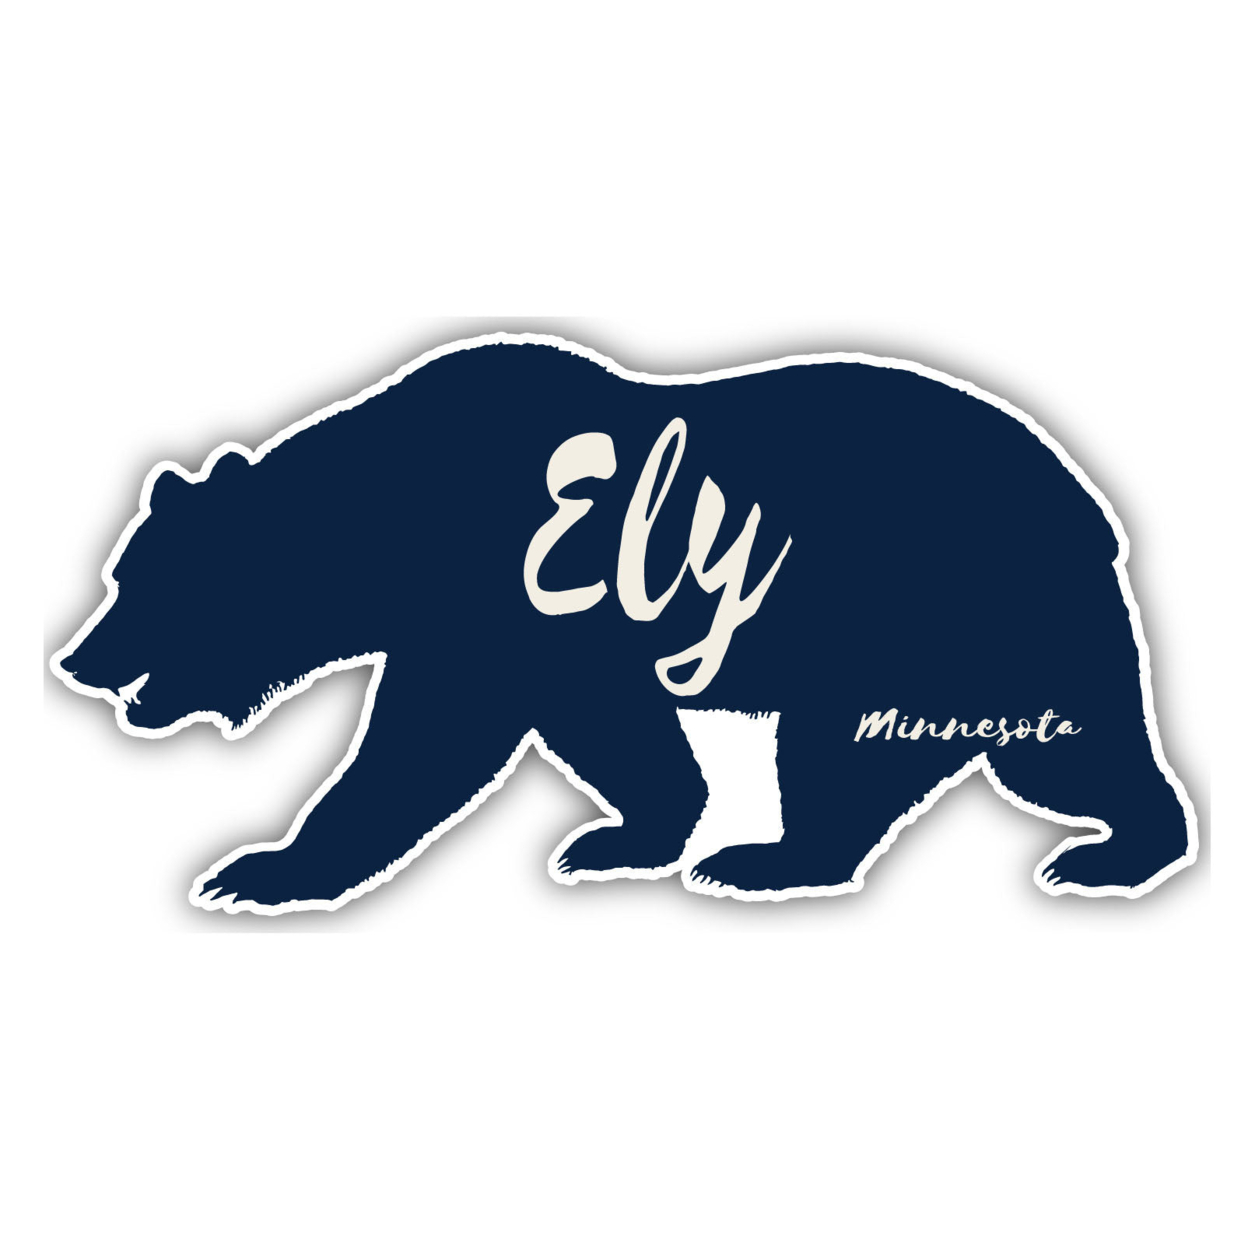 Ely Minnesota Souvenir Decorative Stickers (Choose Theme And Size) - 4-Pack, 8-Inch, Tent